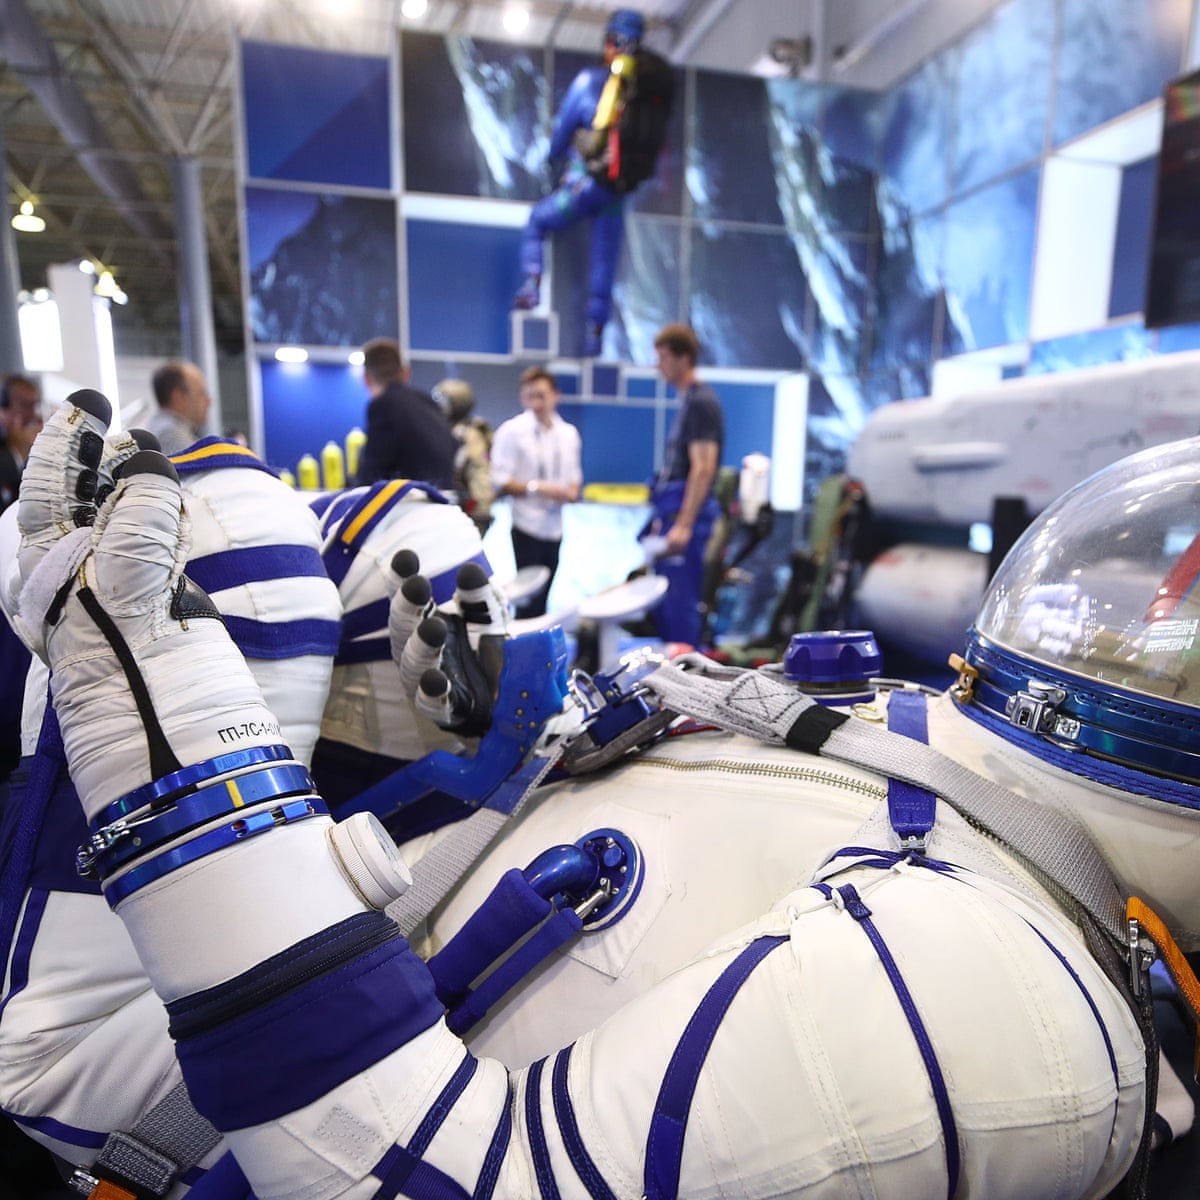 No-fly zone: Russian space suit redesign halts lucky pee ritual | Russia | The Guardian